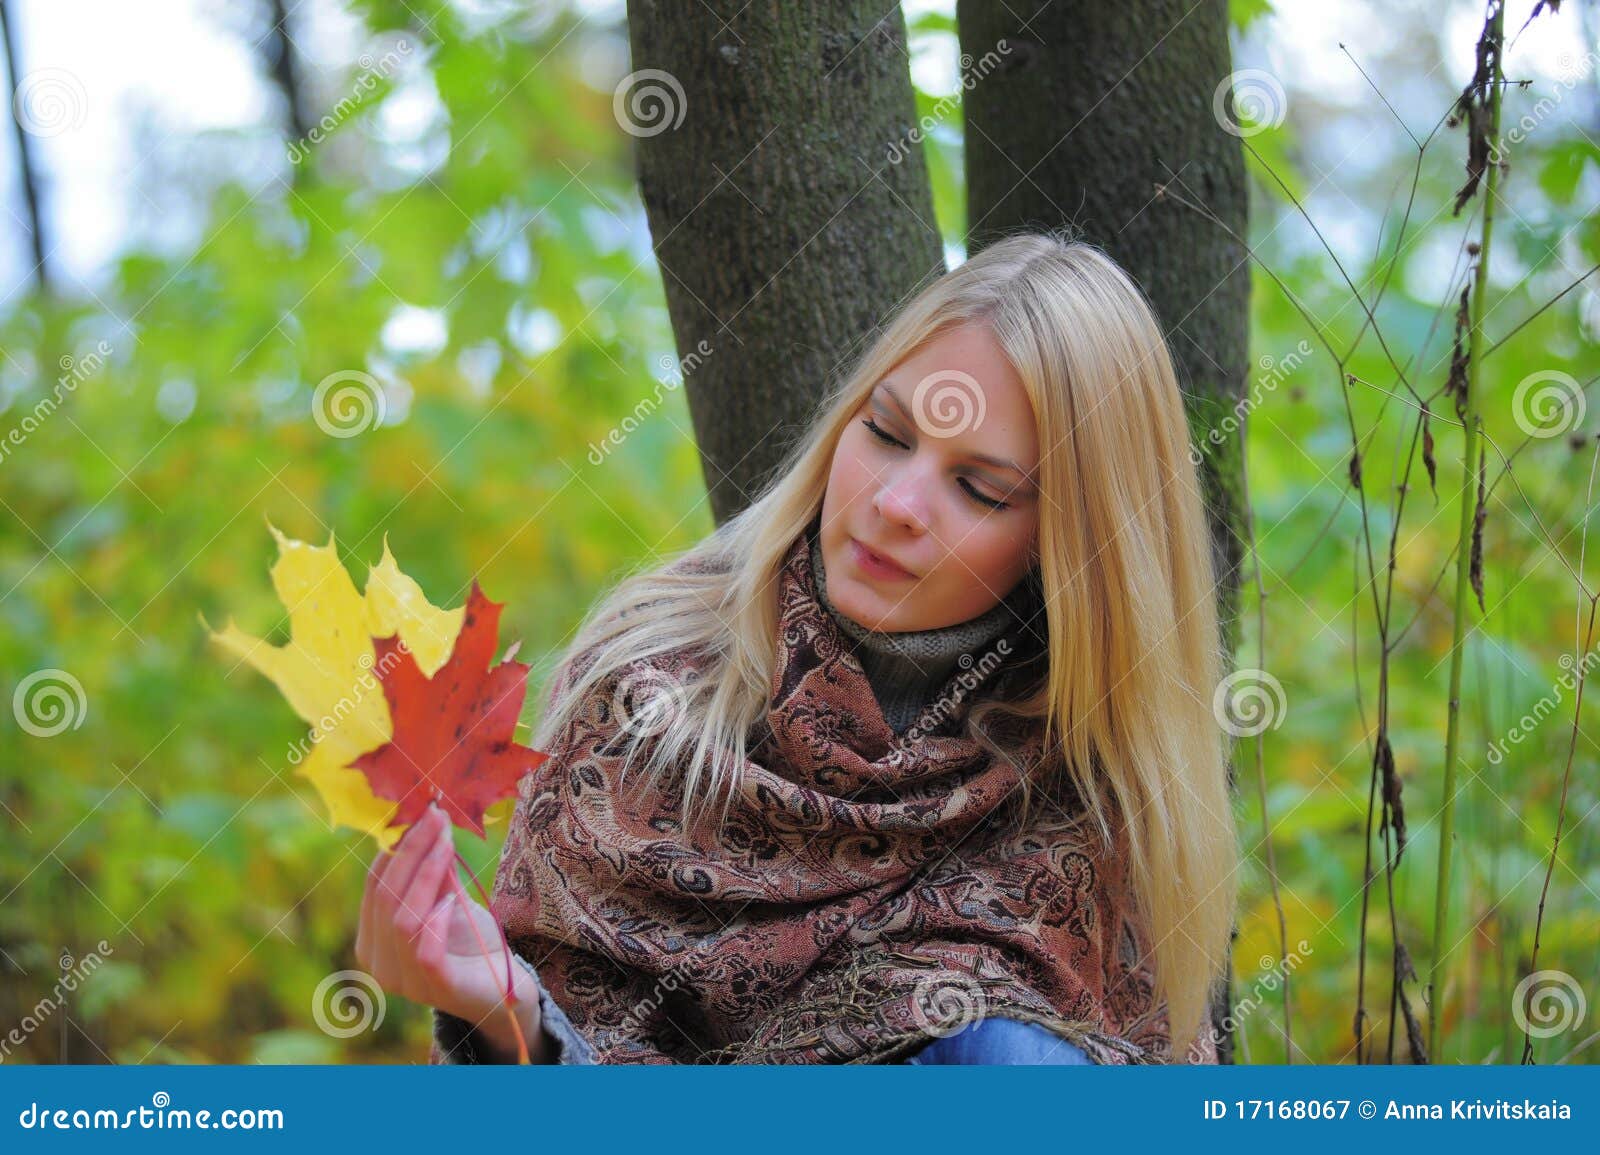 Girl with Autumn Maple Leaves Stock Image - Image of leisure, looking ...